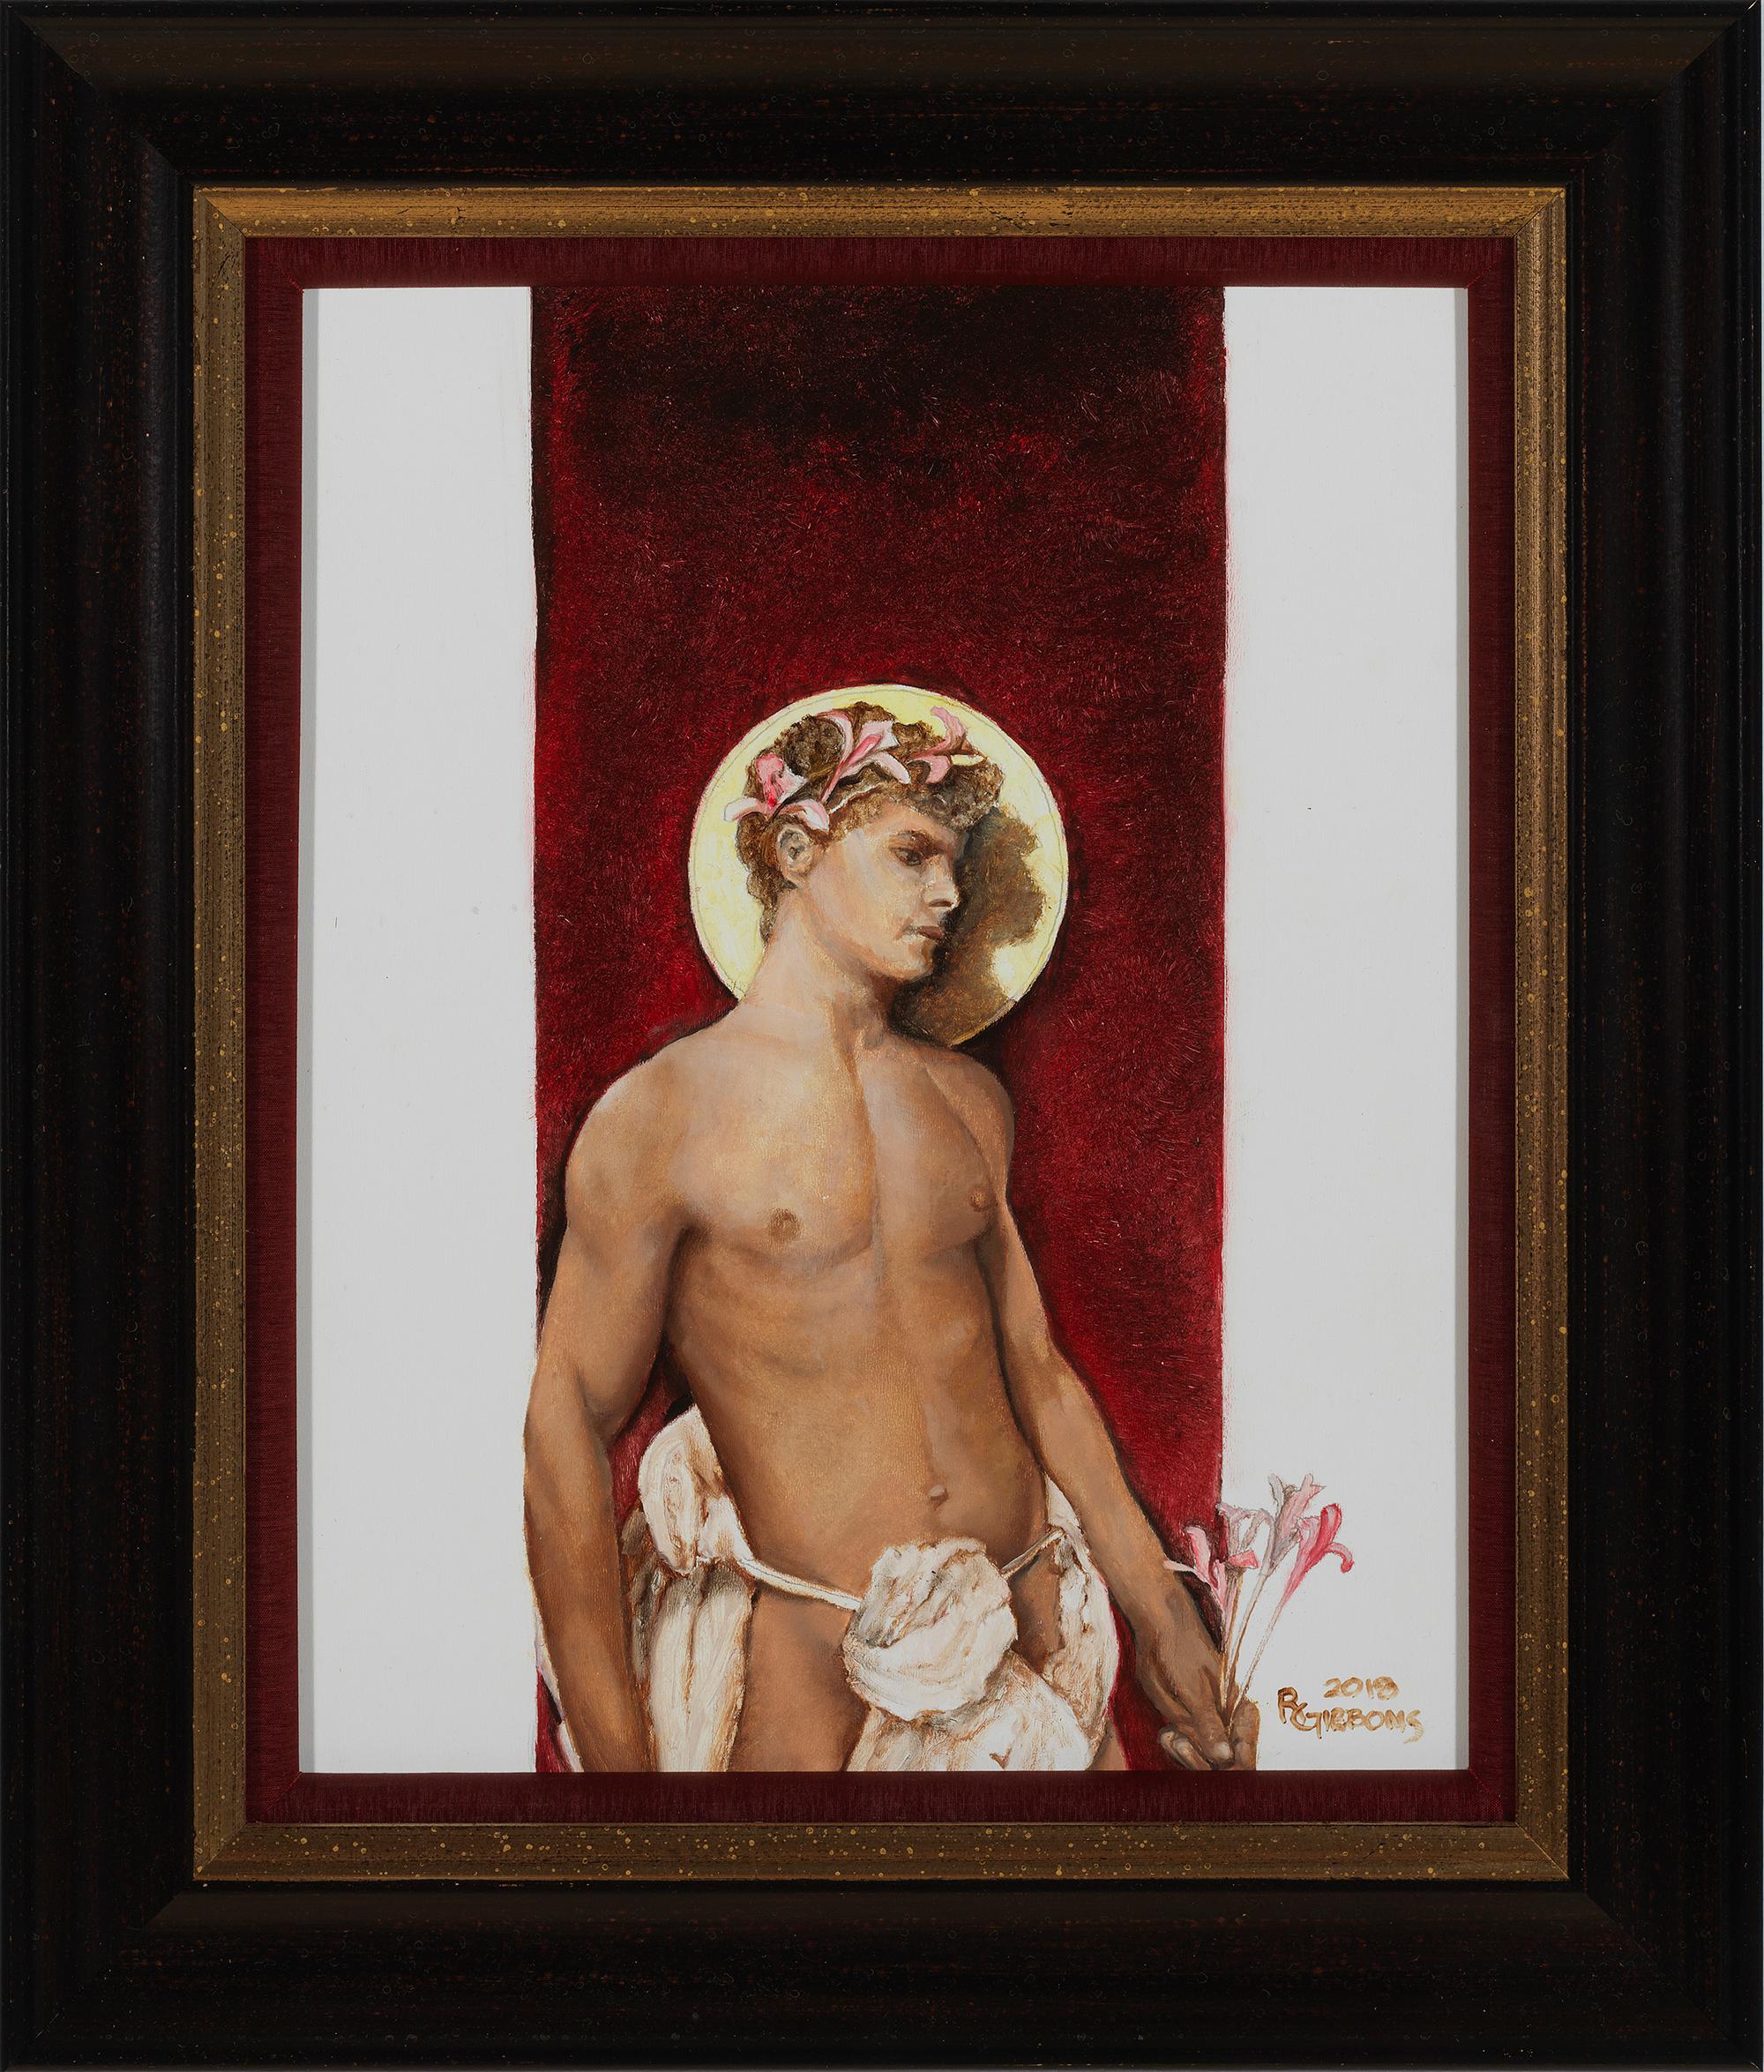 Richard Gibbons Nude Painting - Saint - Young, Semi-Nude Male with Burgundy and White Background, Oil on Panel